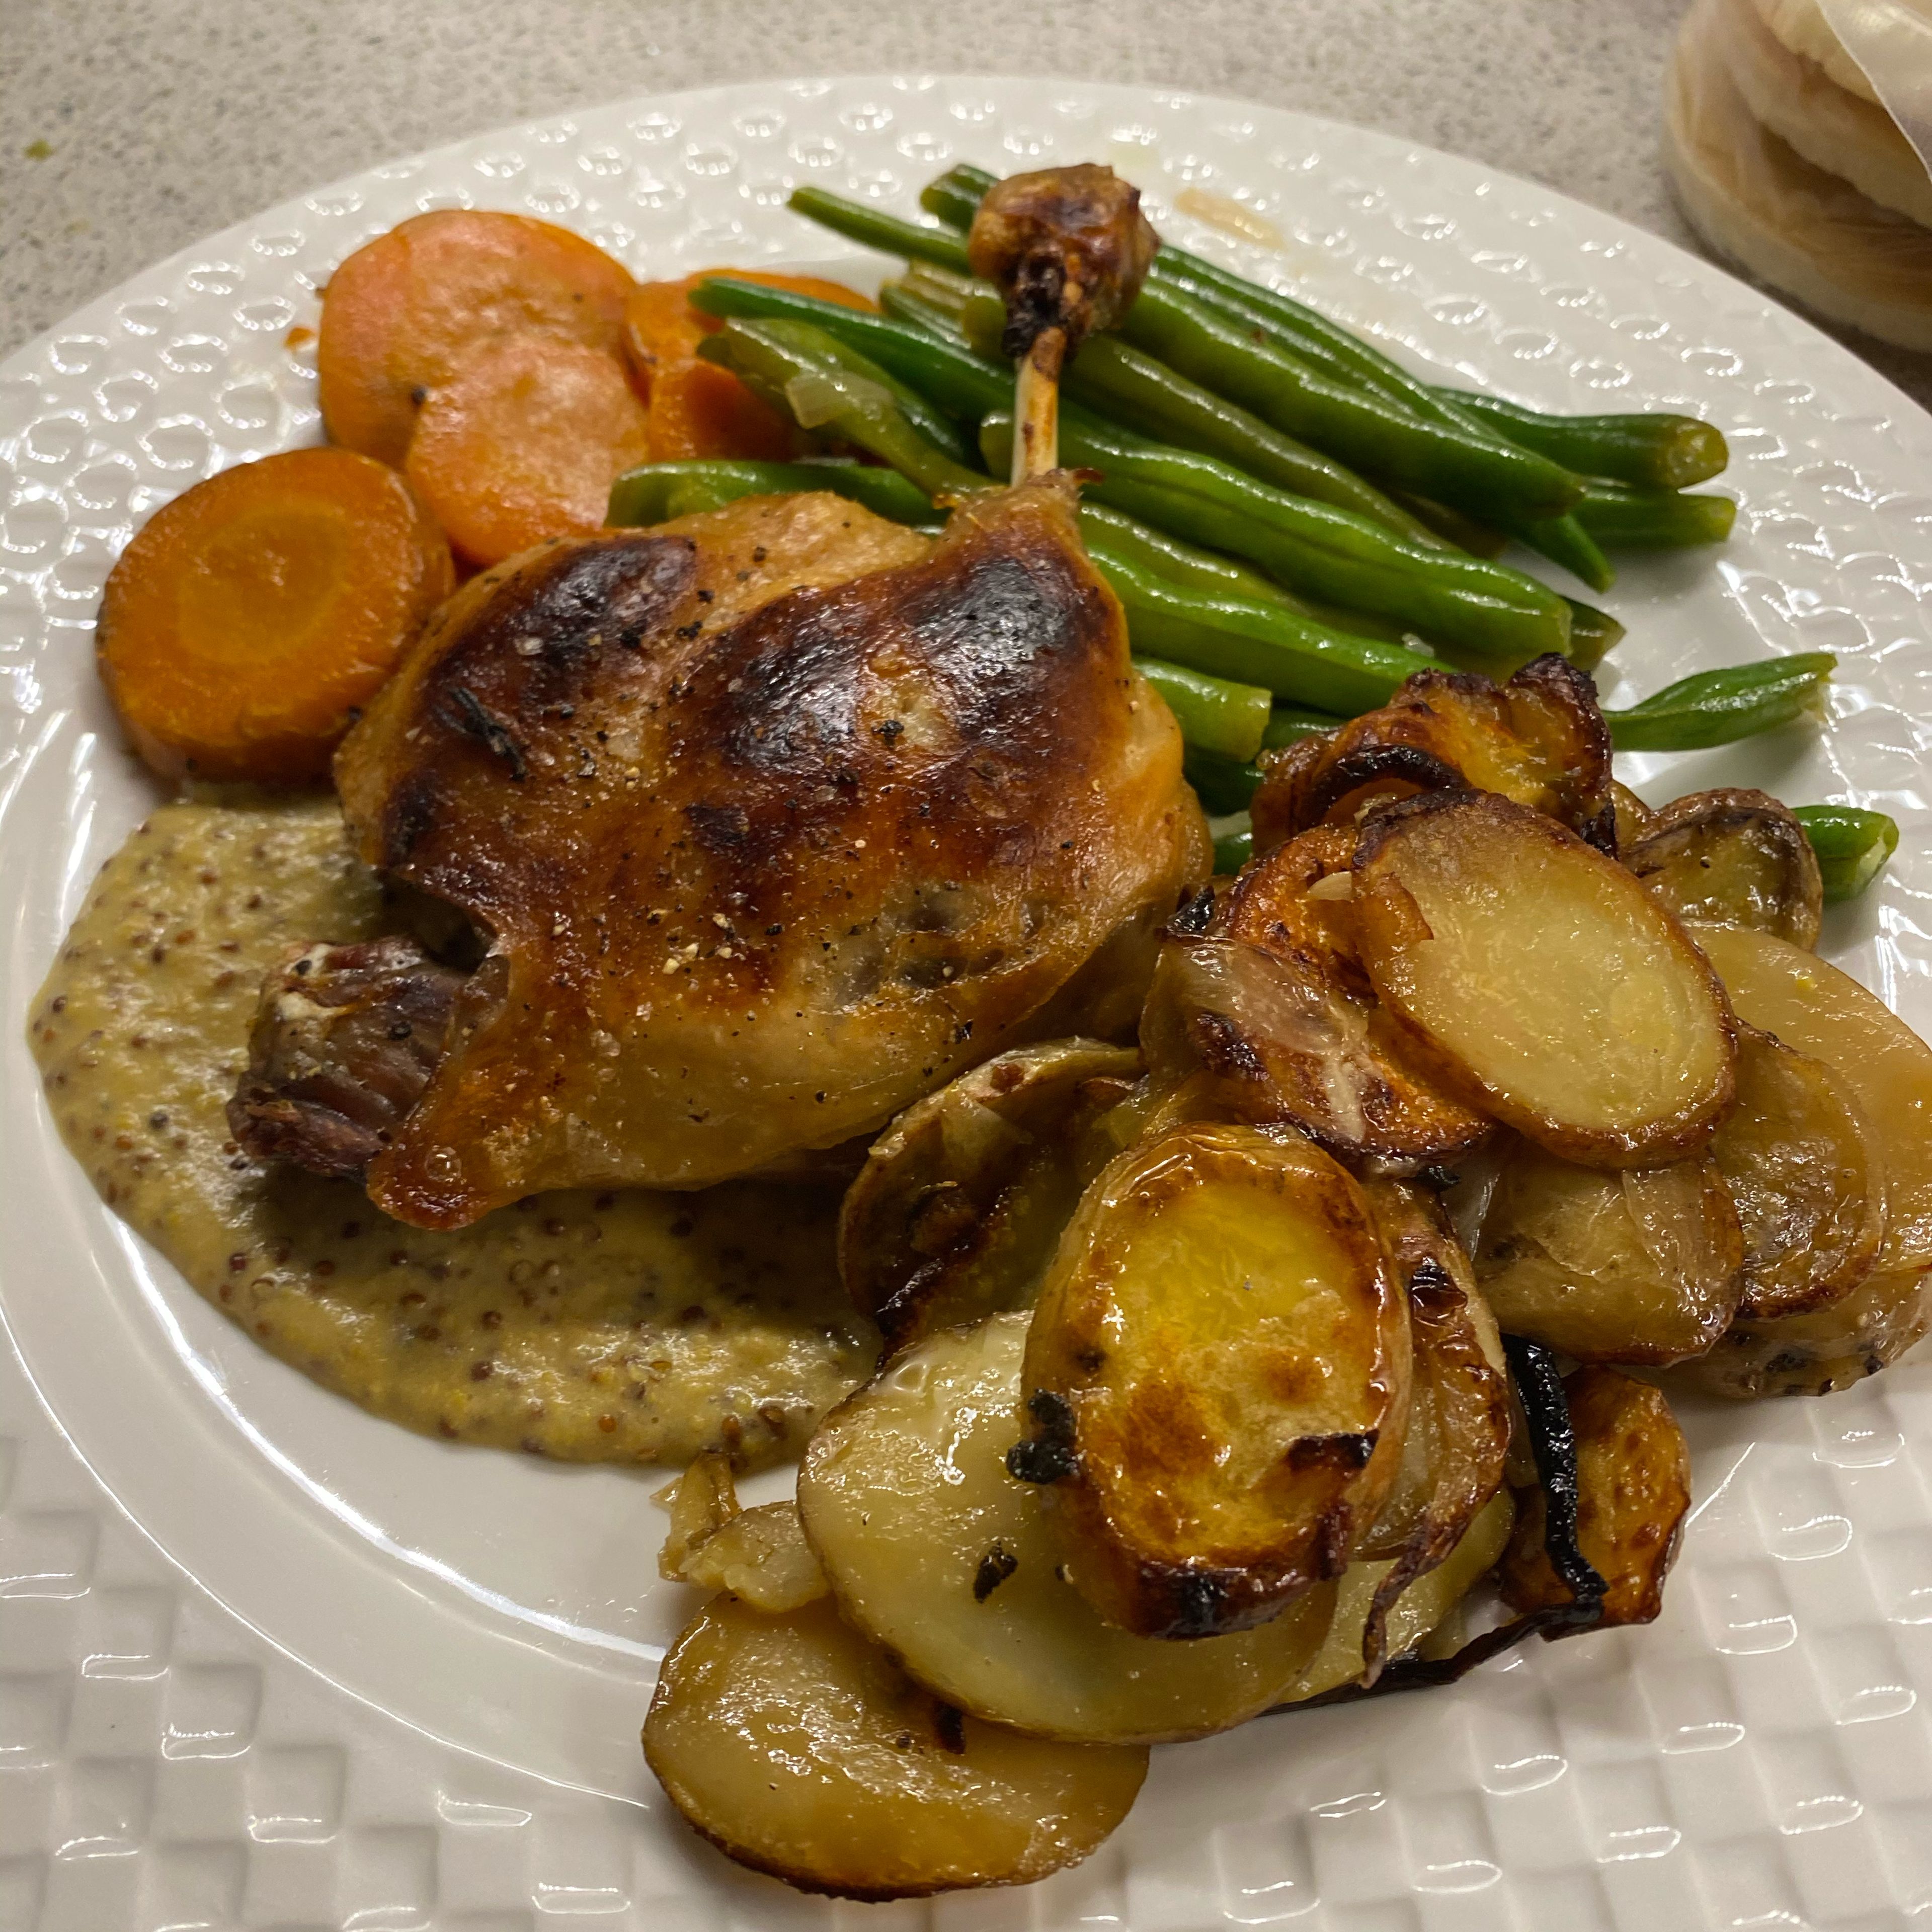 I made a Dijon cream sauce (Dijon, whole grain mustard and a bit of cream, warmed for a couple mins and finished with half Tbs of butter) to serve with the duck and blanched string beans tossed in duck fat. It would also be great with a sharp vinaigrette salad.